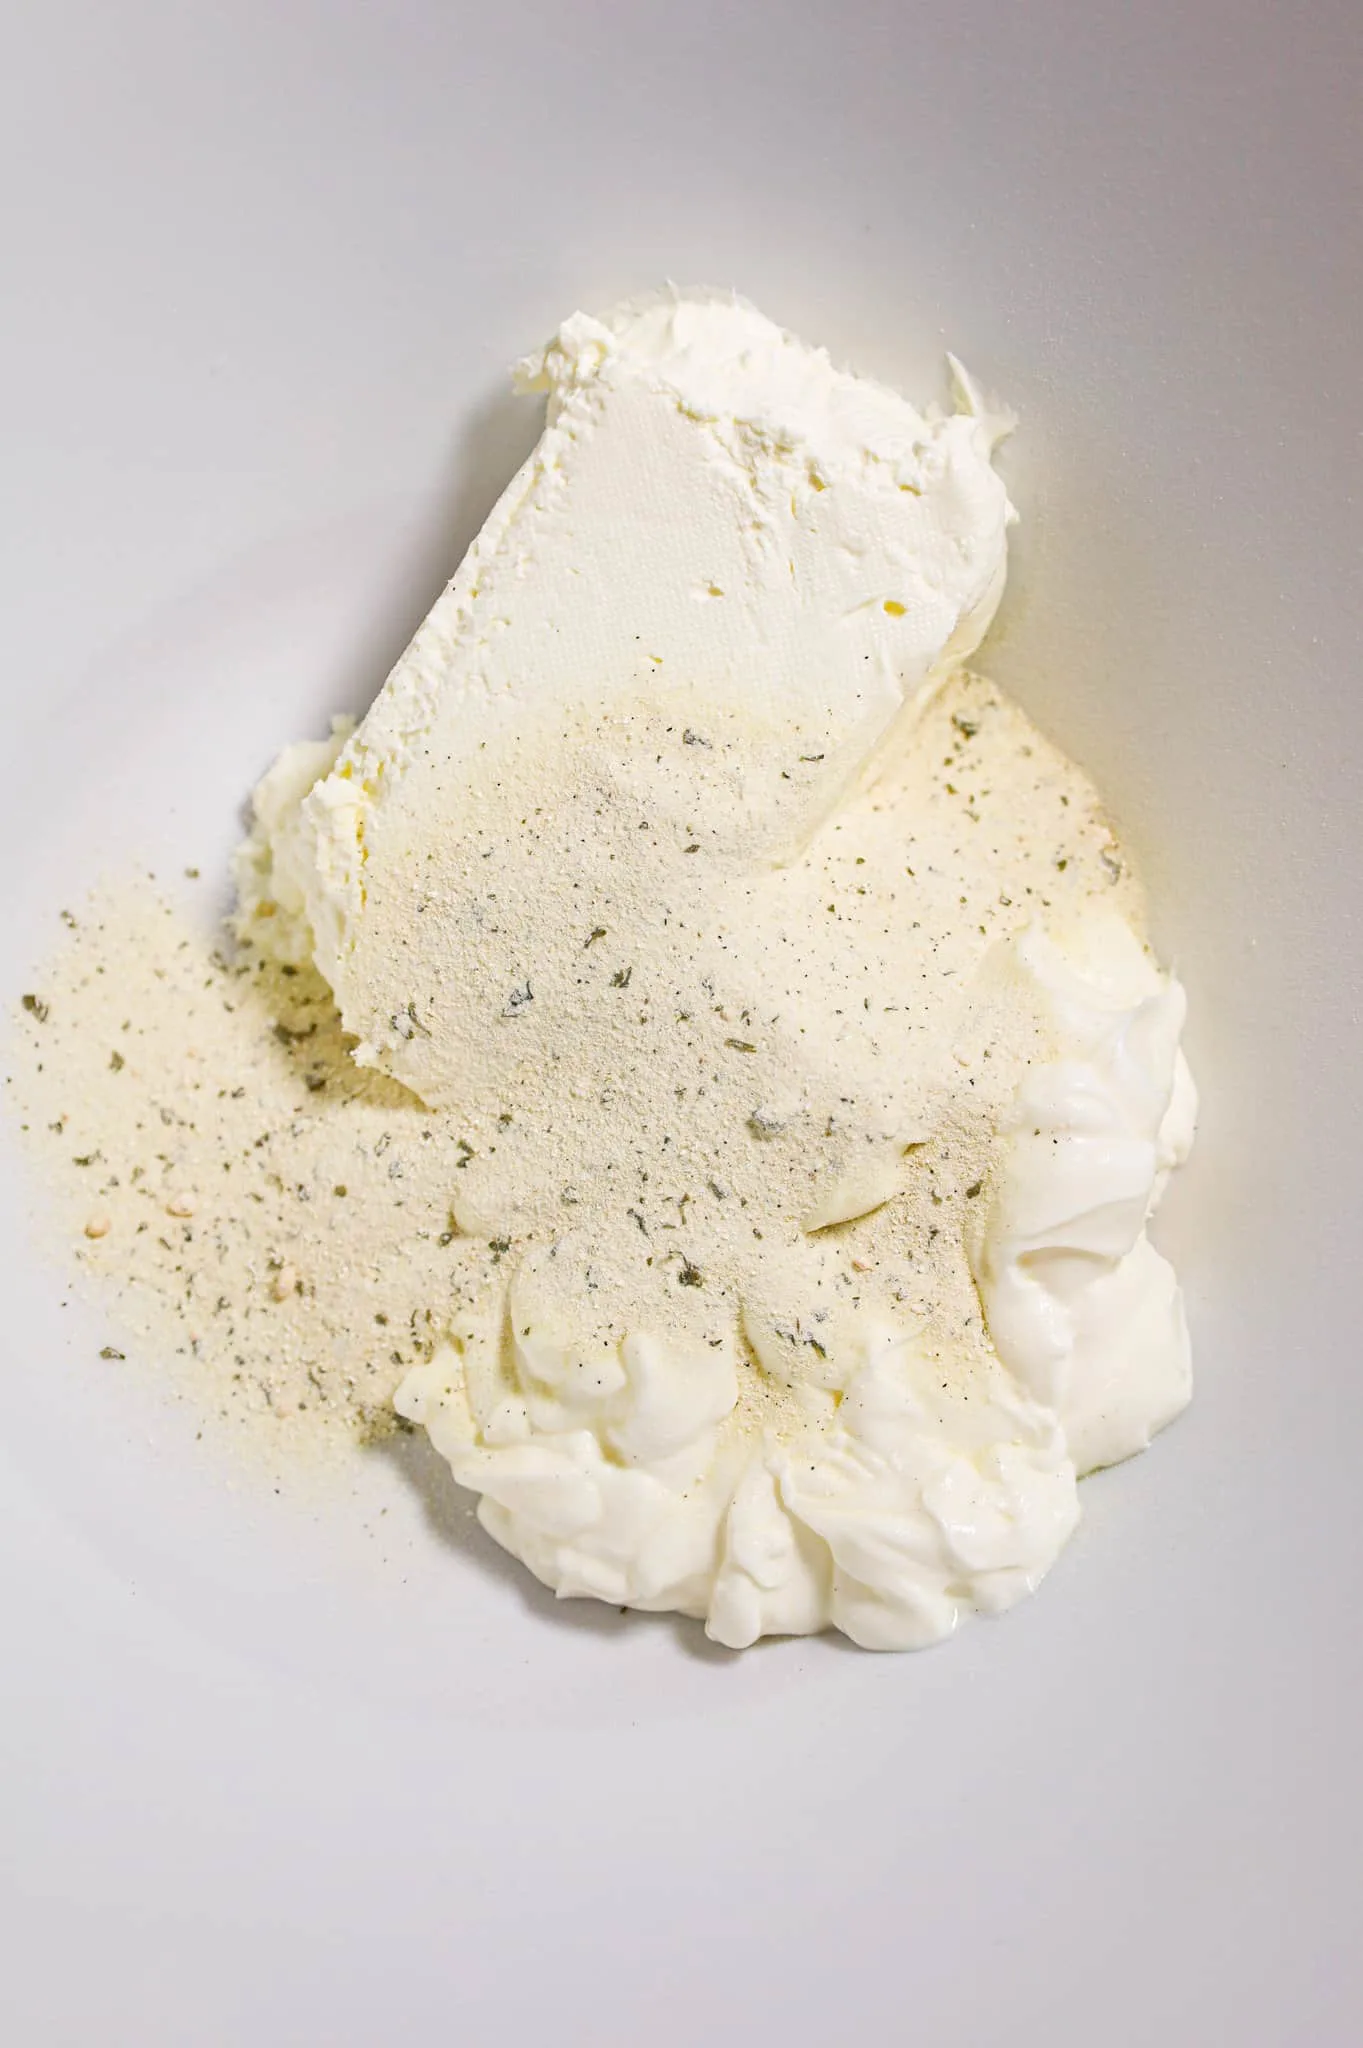 softened cream cheese, sour cream and ranch dressing mix in a mixing bowl